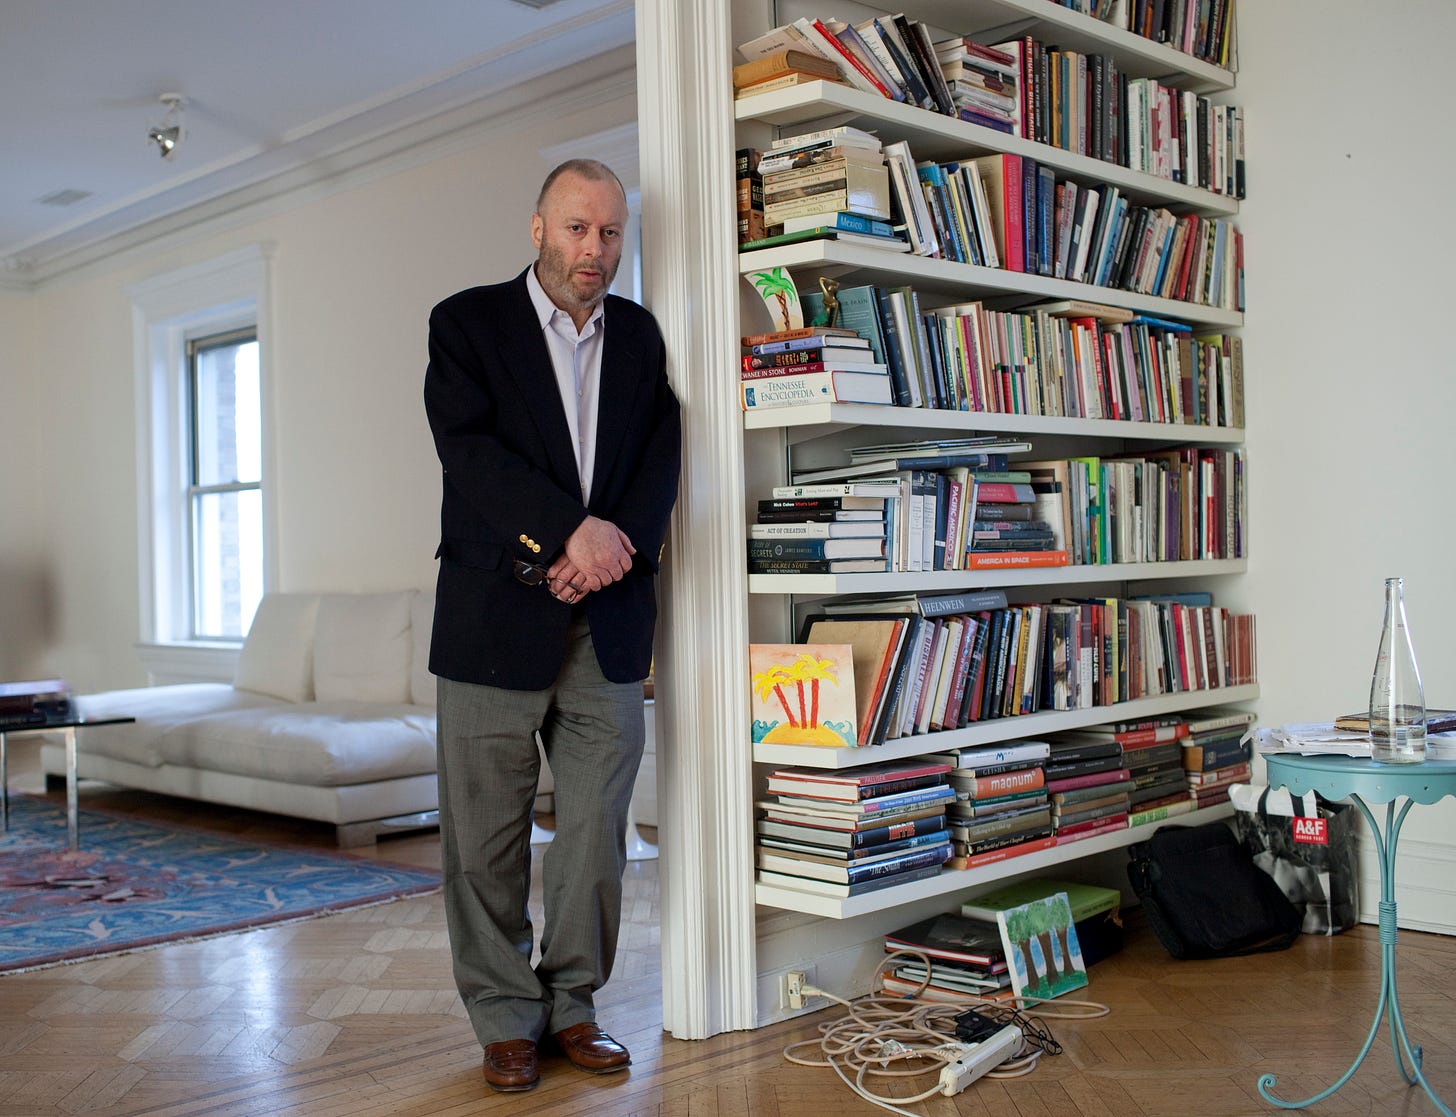 British-American author Christopher Hitchens In his Washington, DC home.